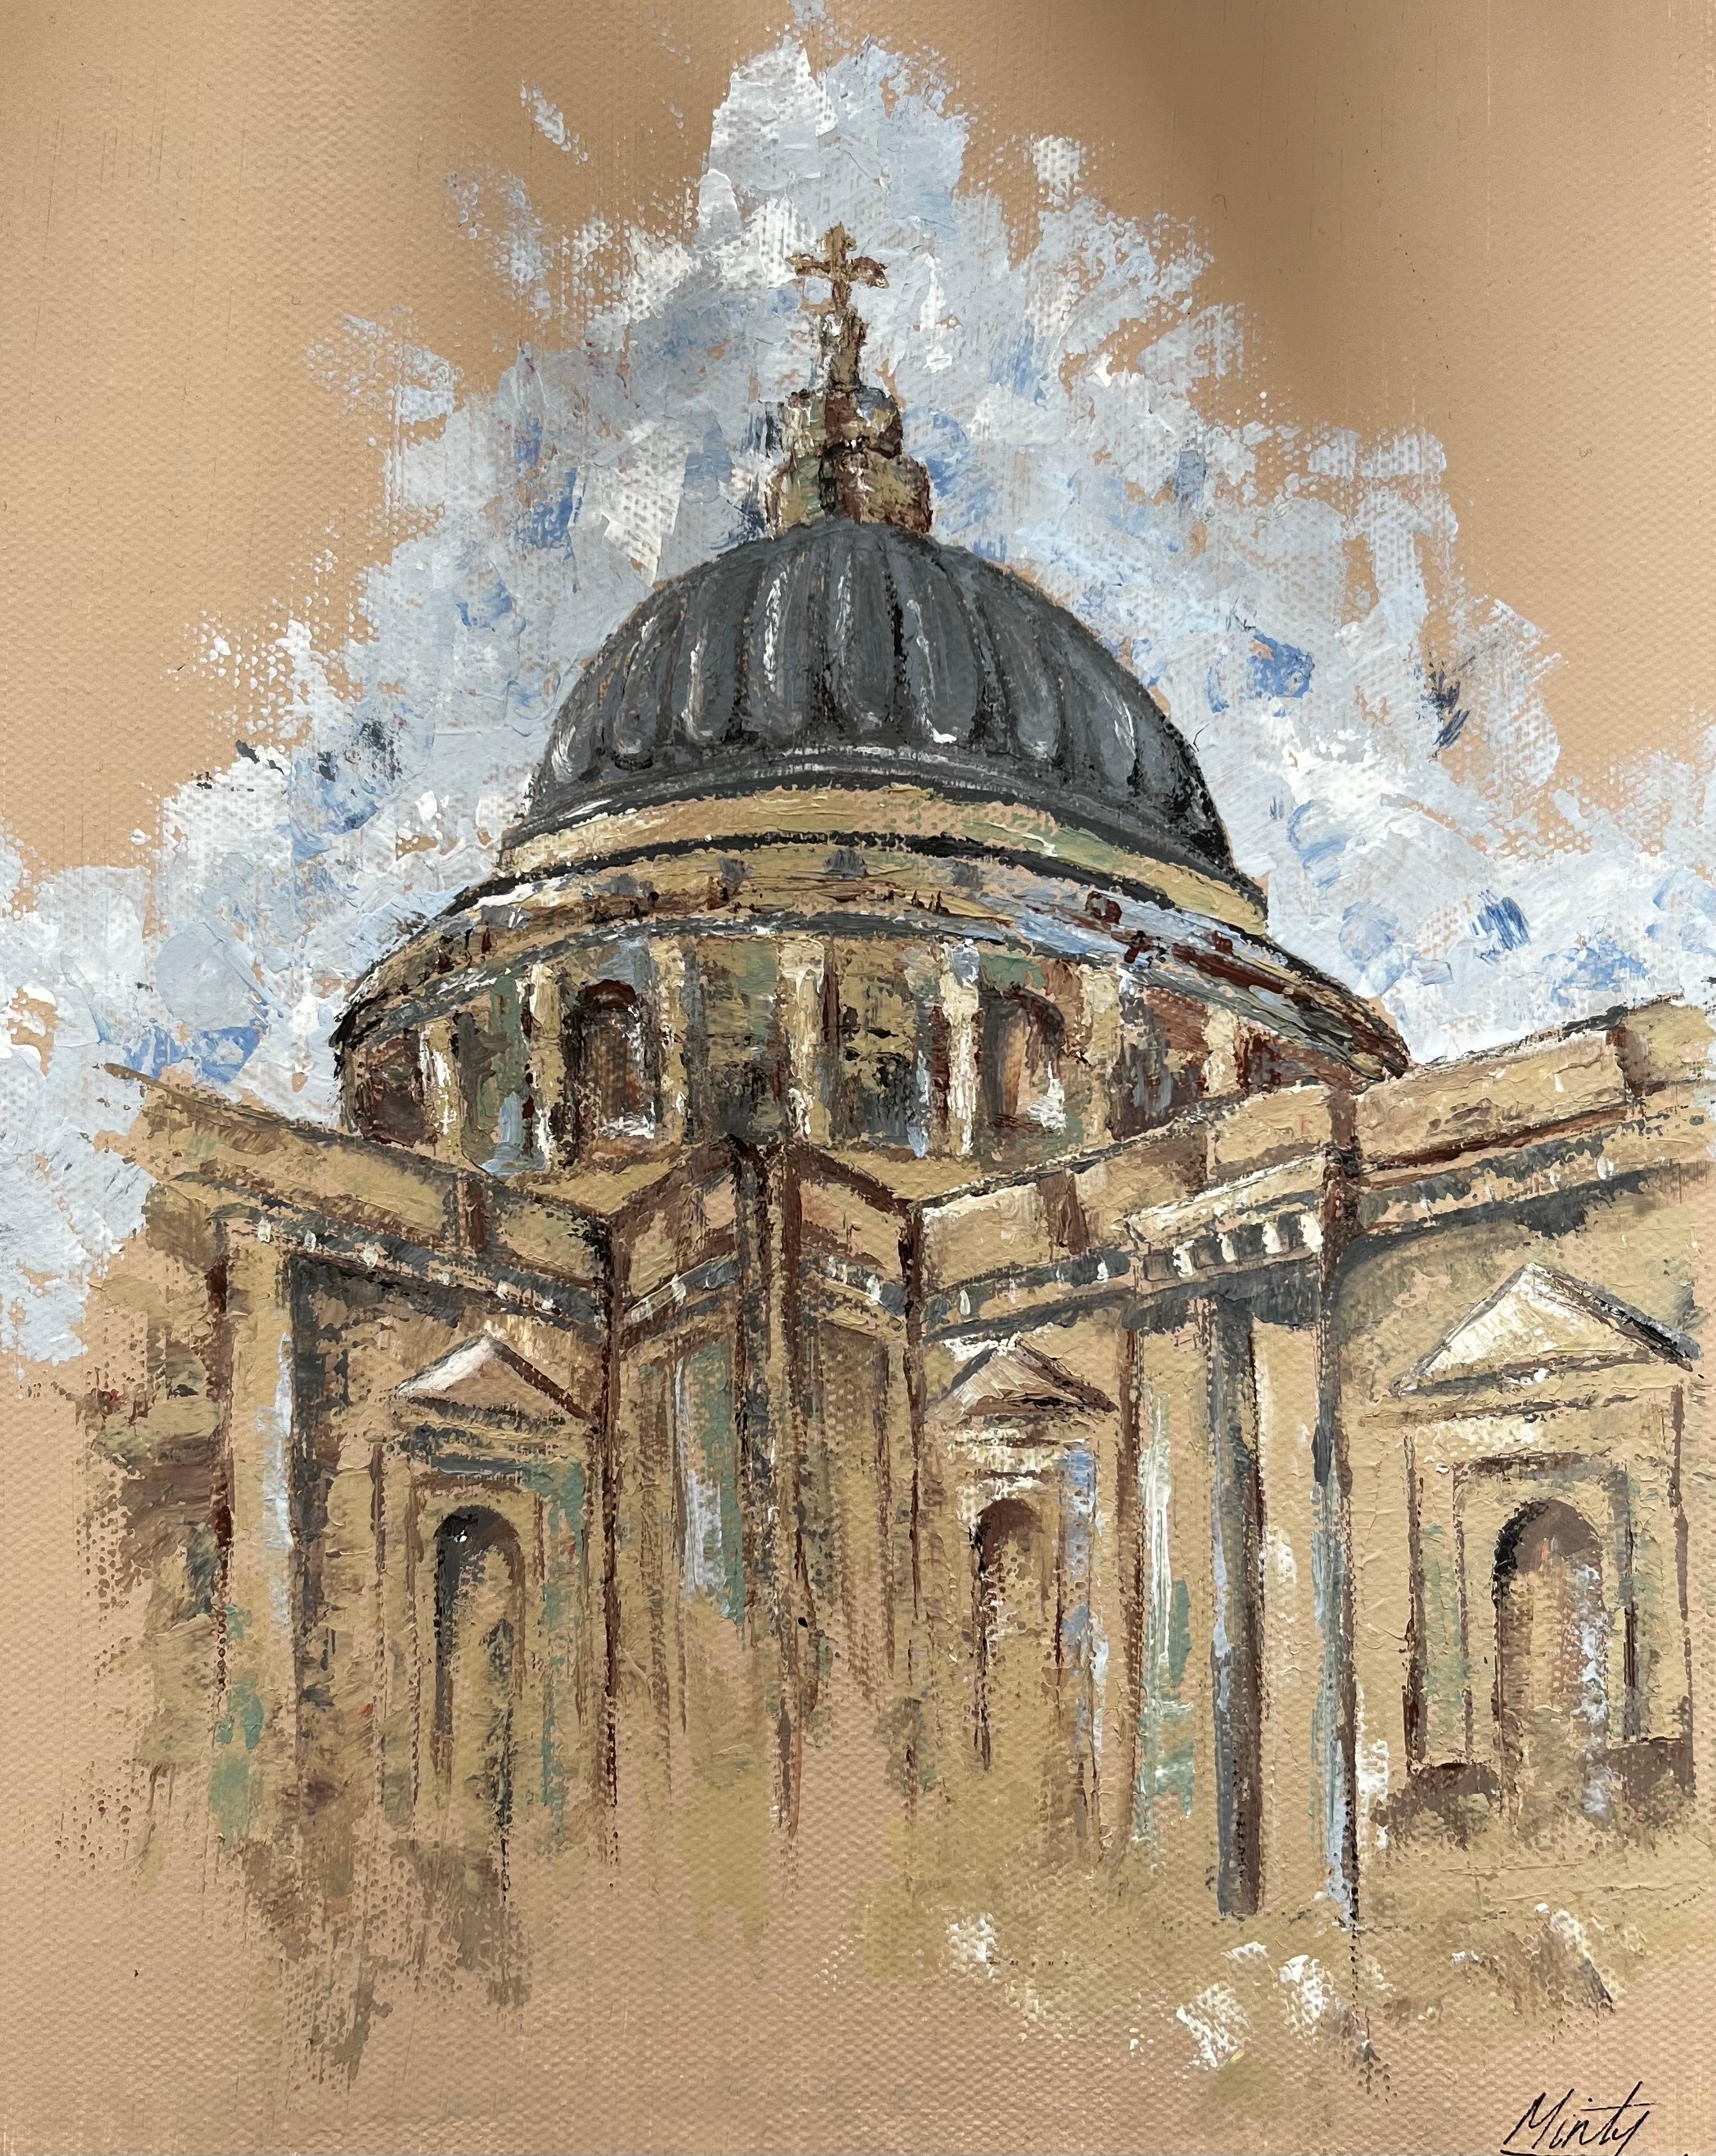 St Pauls Cathedral, London
signed by Minty Ramsey, British contemporary 
acrylic painting on board
10 x 7.9 inches

Wonderful original abstract painting by the British contemporary artist, Minty Ramsey. 

Living in London & Cornwall, Ramsey draws